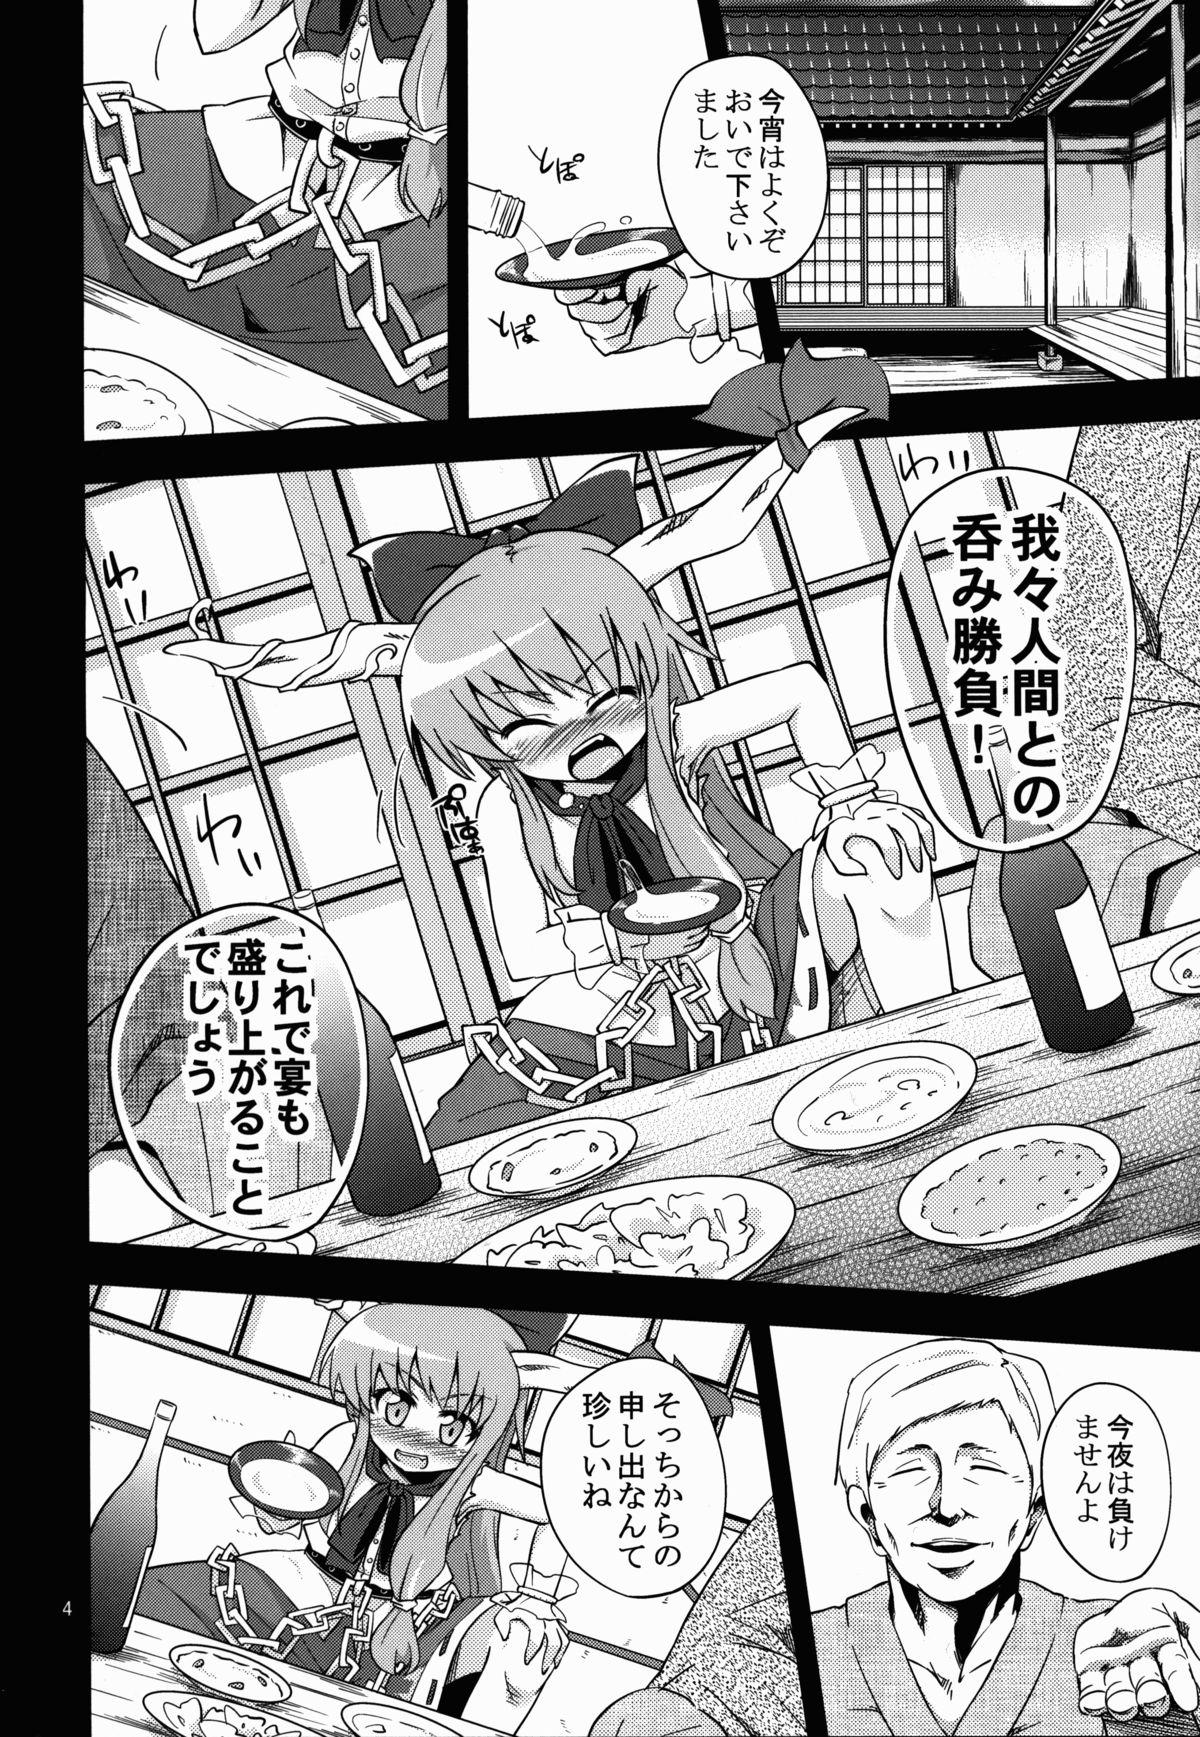 Pickup 鬼犯嘘犯喜 - Touhou project Rough Sex - Page 4